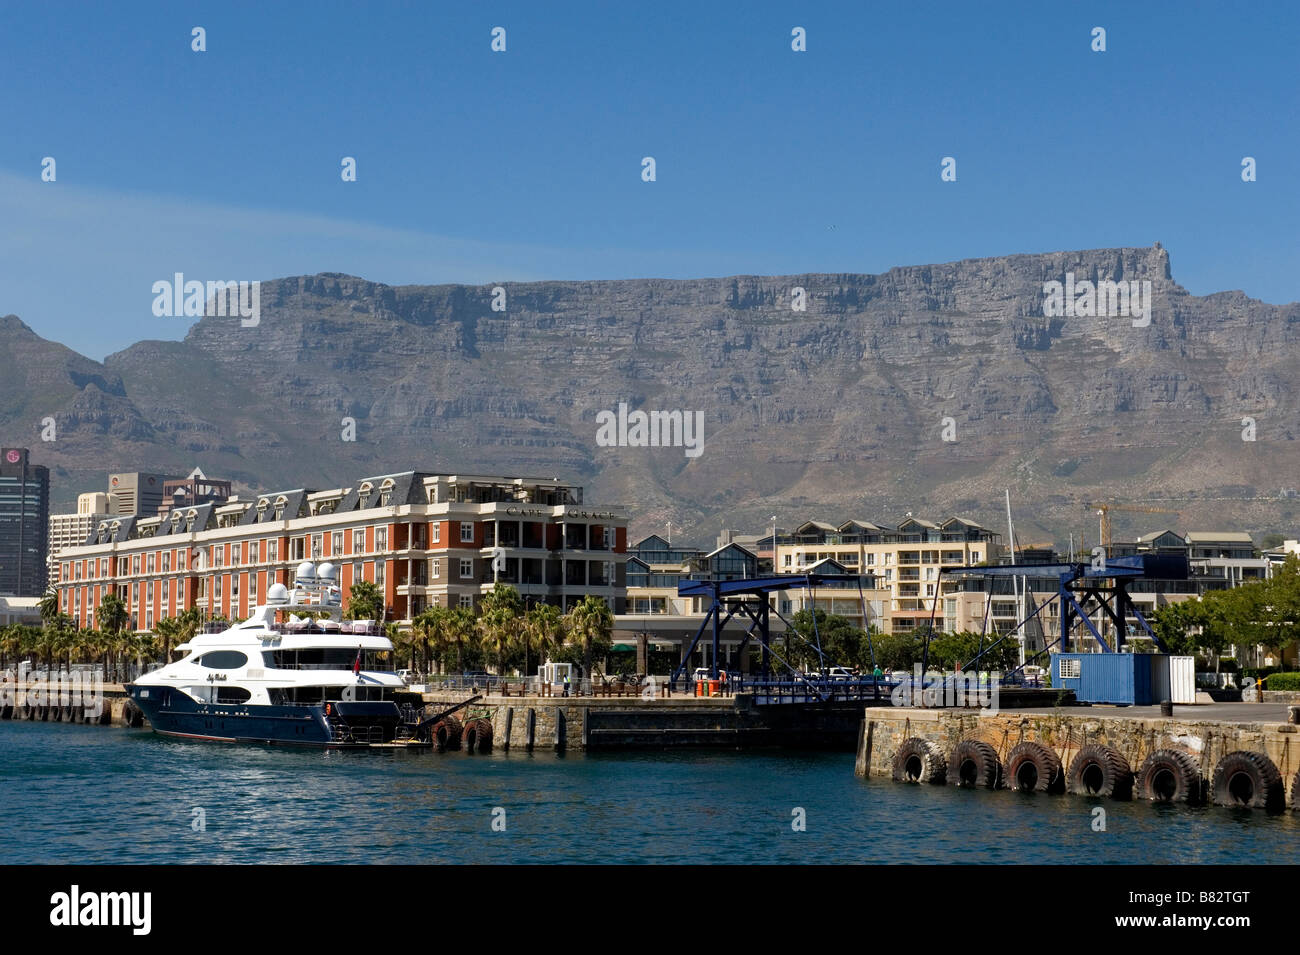 Table mountain and residential area at Victoria and Alfred waterfront Cape Town South Africa Stock Photo